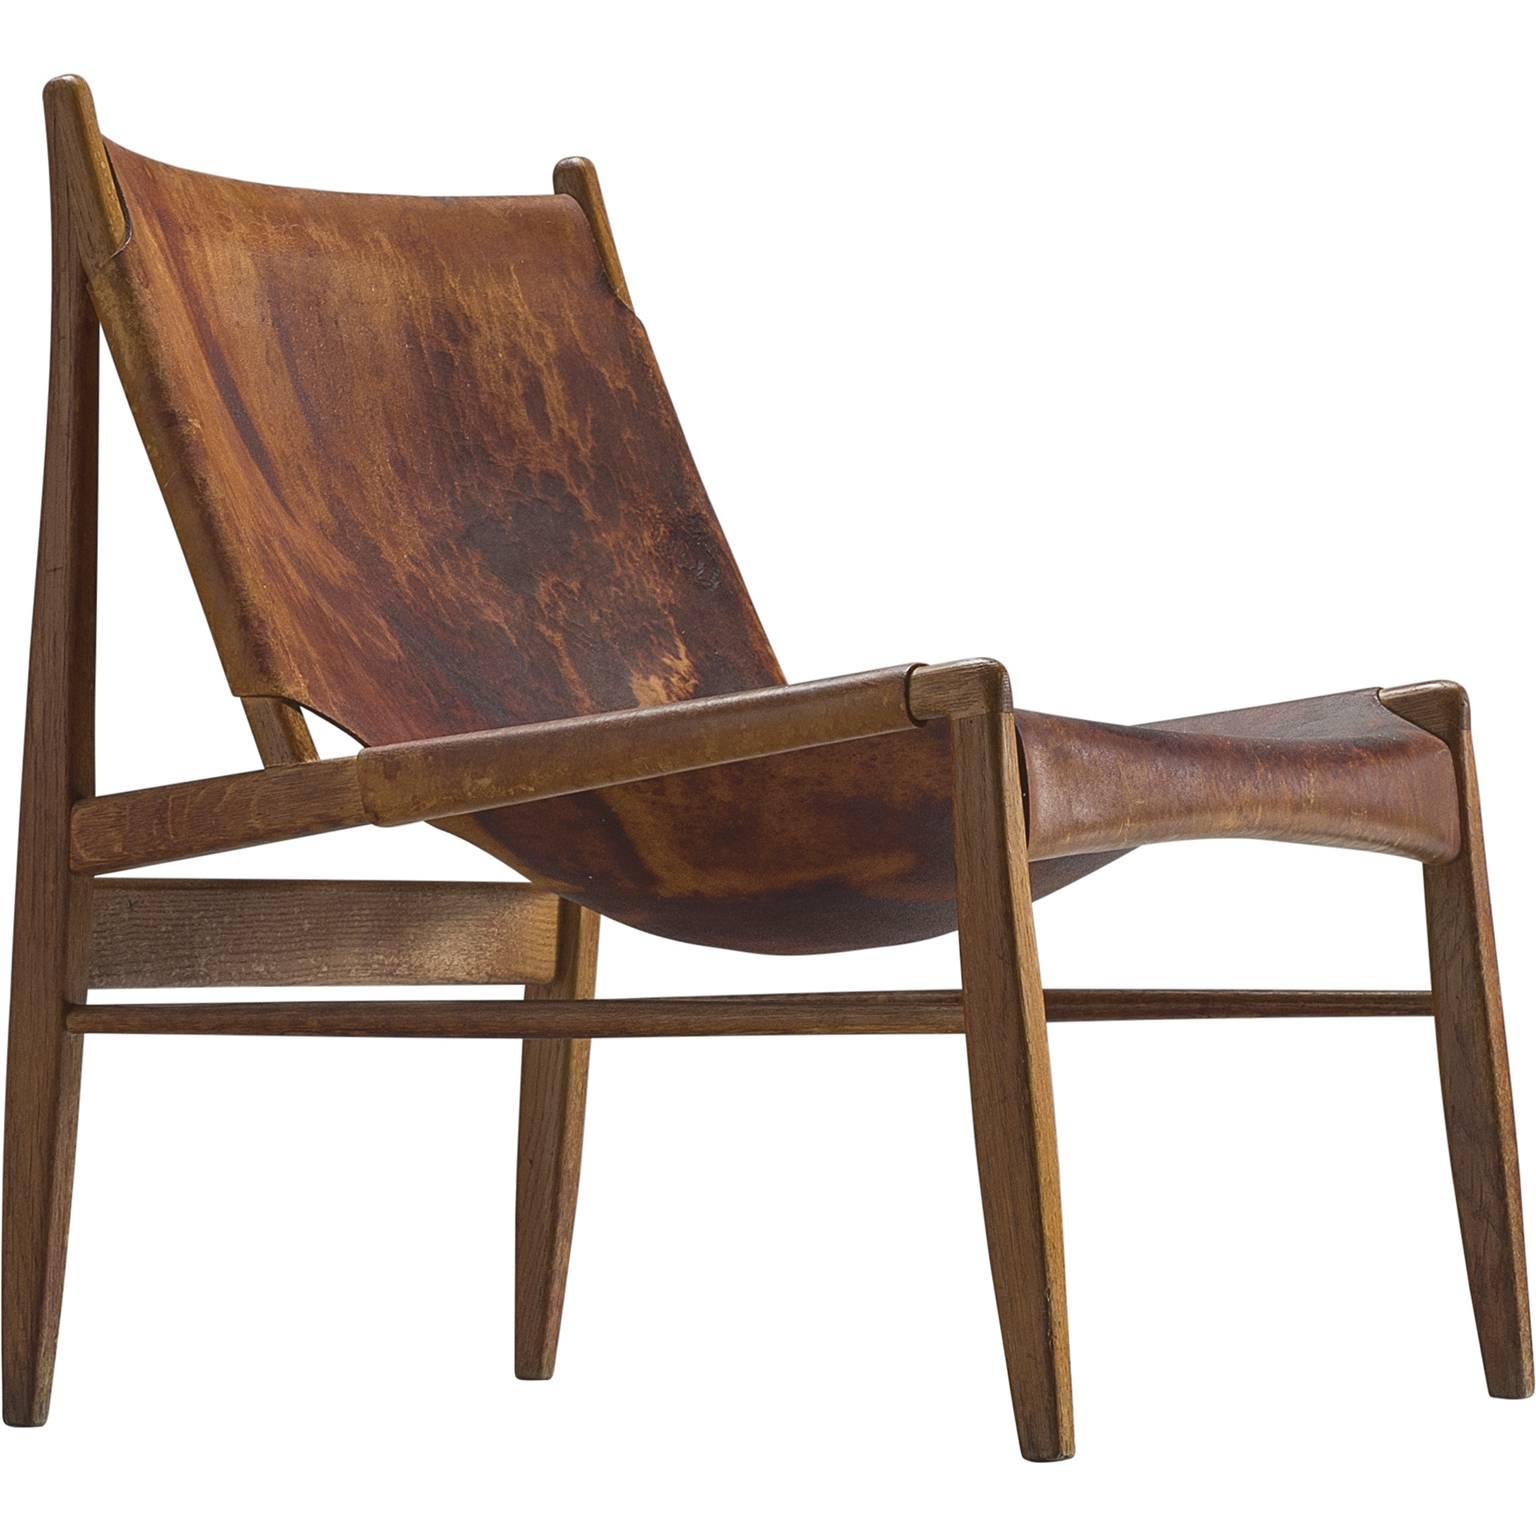 Hunting Chair by Franz Xaver Lutz in Original Cognac Leather